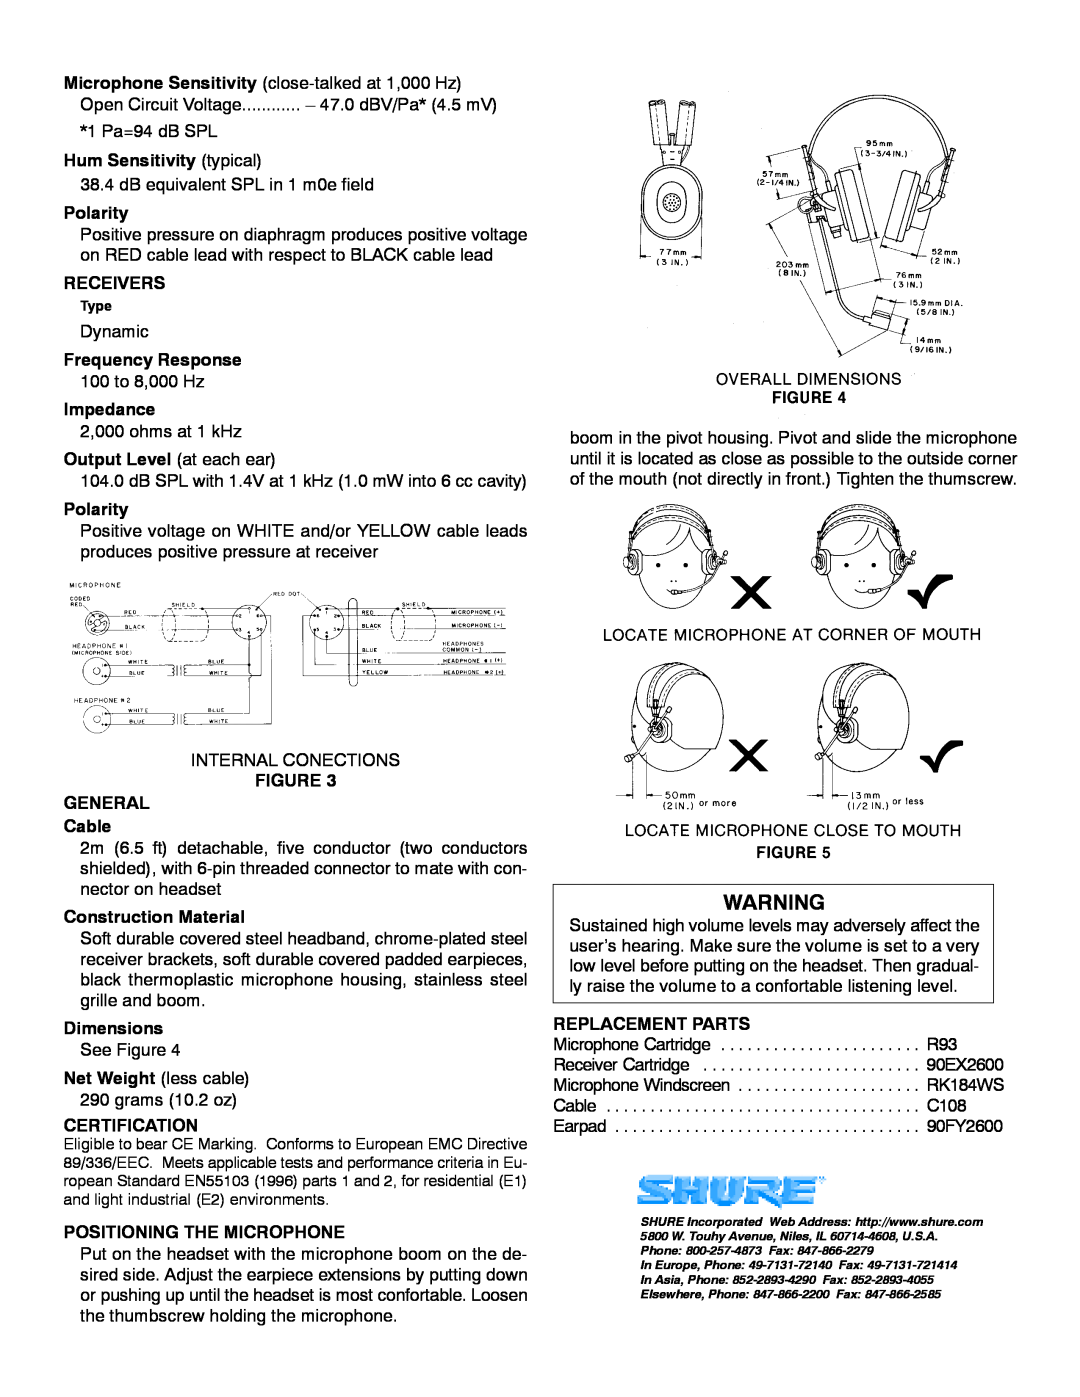 Shure SM2 specifications Hum Sensitivity typical 